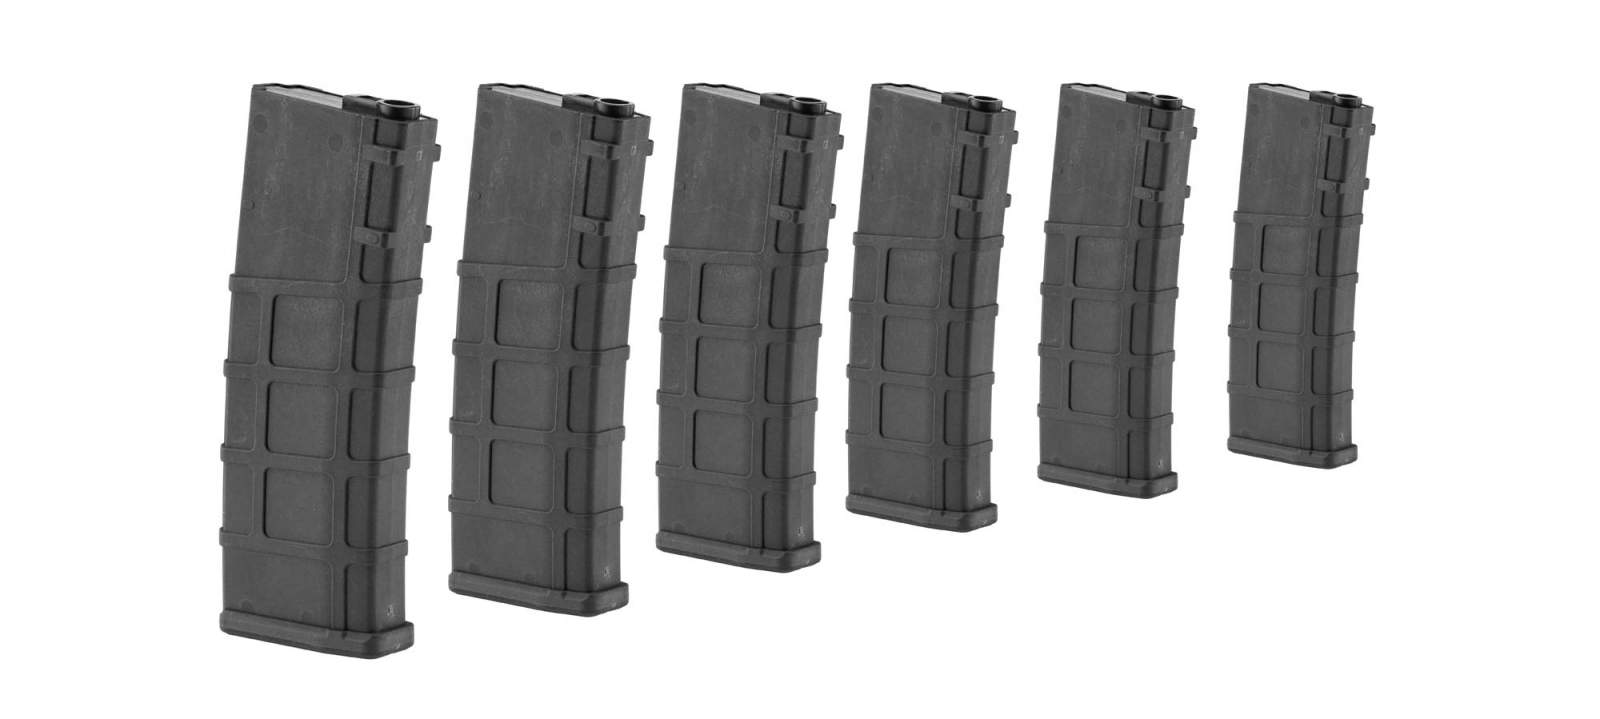 Photo Airsoft Magazine Real Cap 30 rds for M4 AEG Polymer Black - Pack of 6 pcs